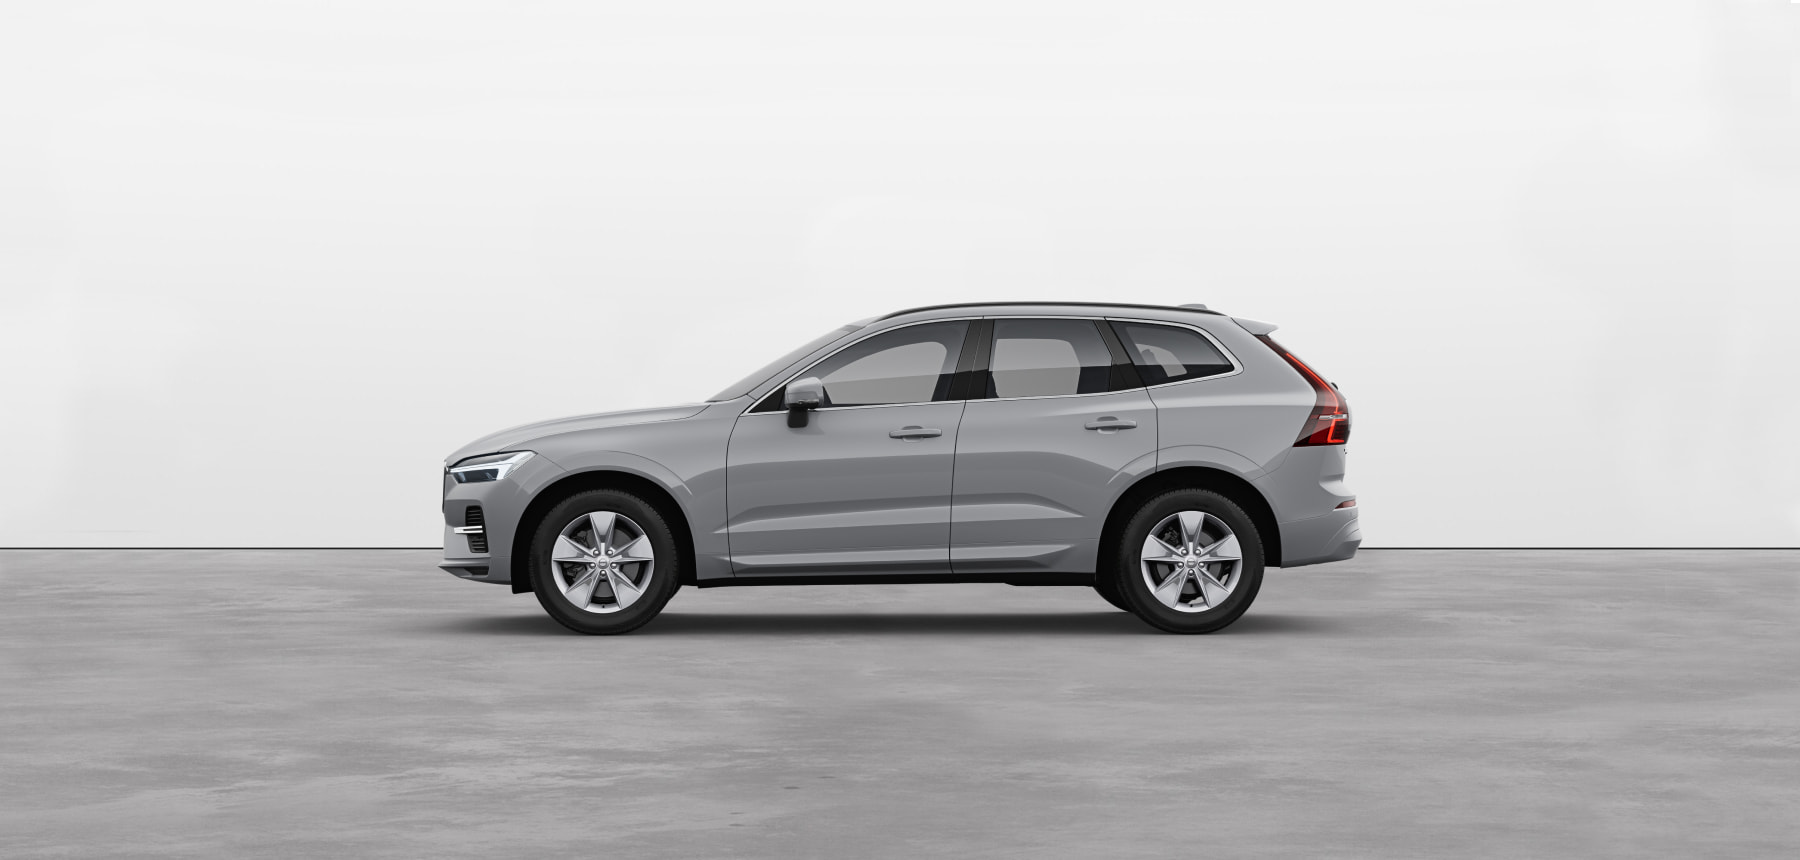 A vapour grey Volvo XC60 SUV standing still on grey floor in a studio.